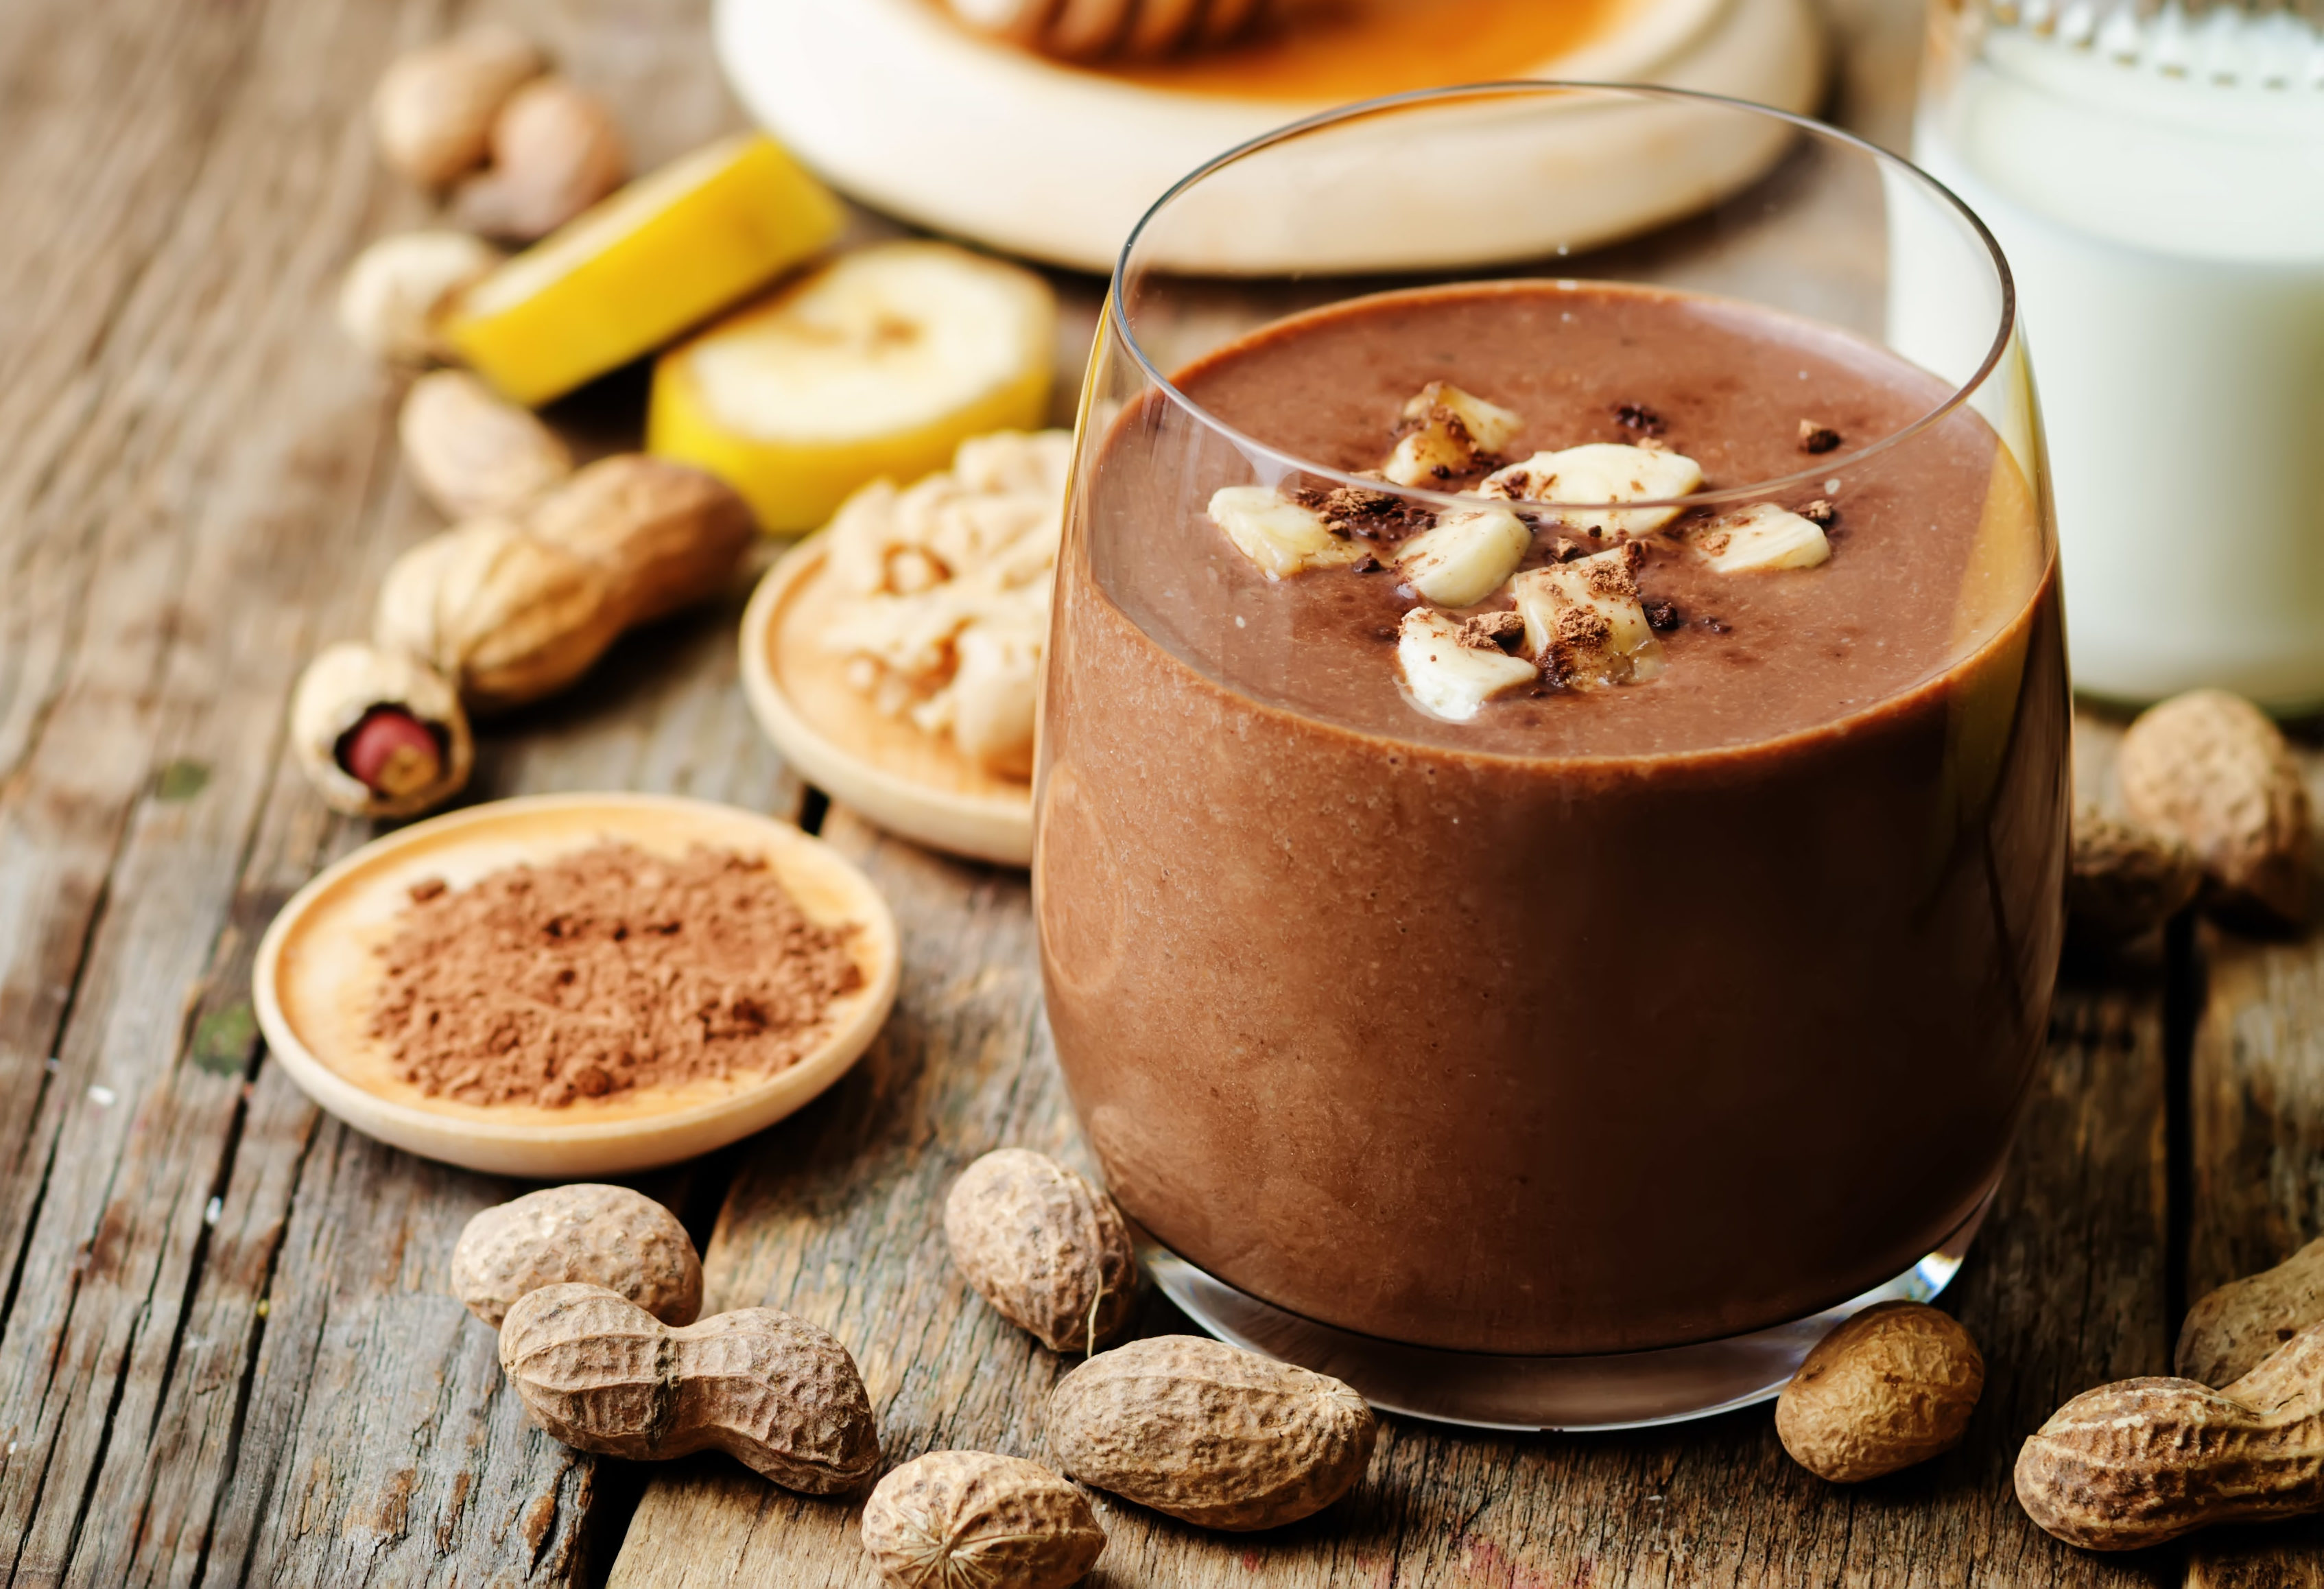 The Most Delicious Chocolate Peanut Butter Shake